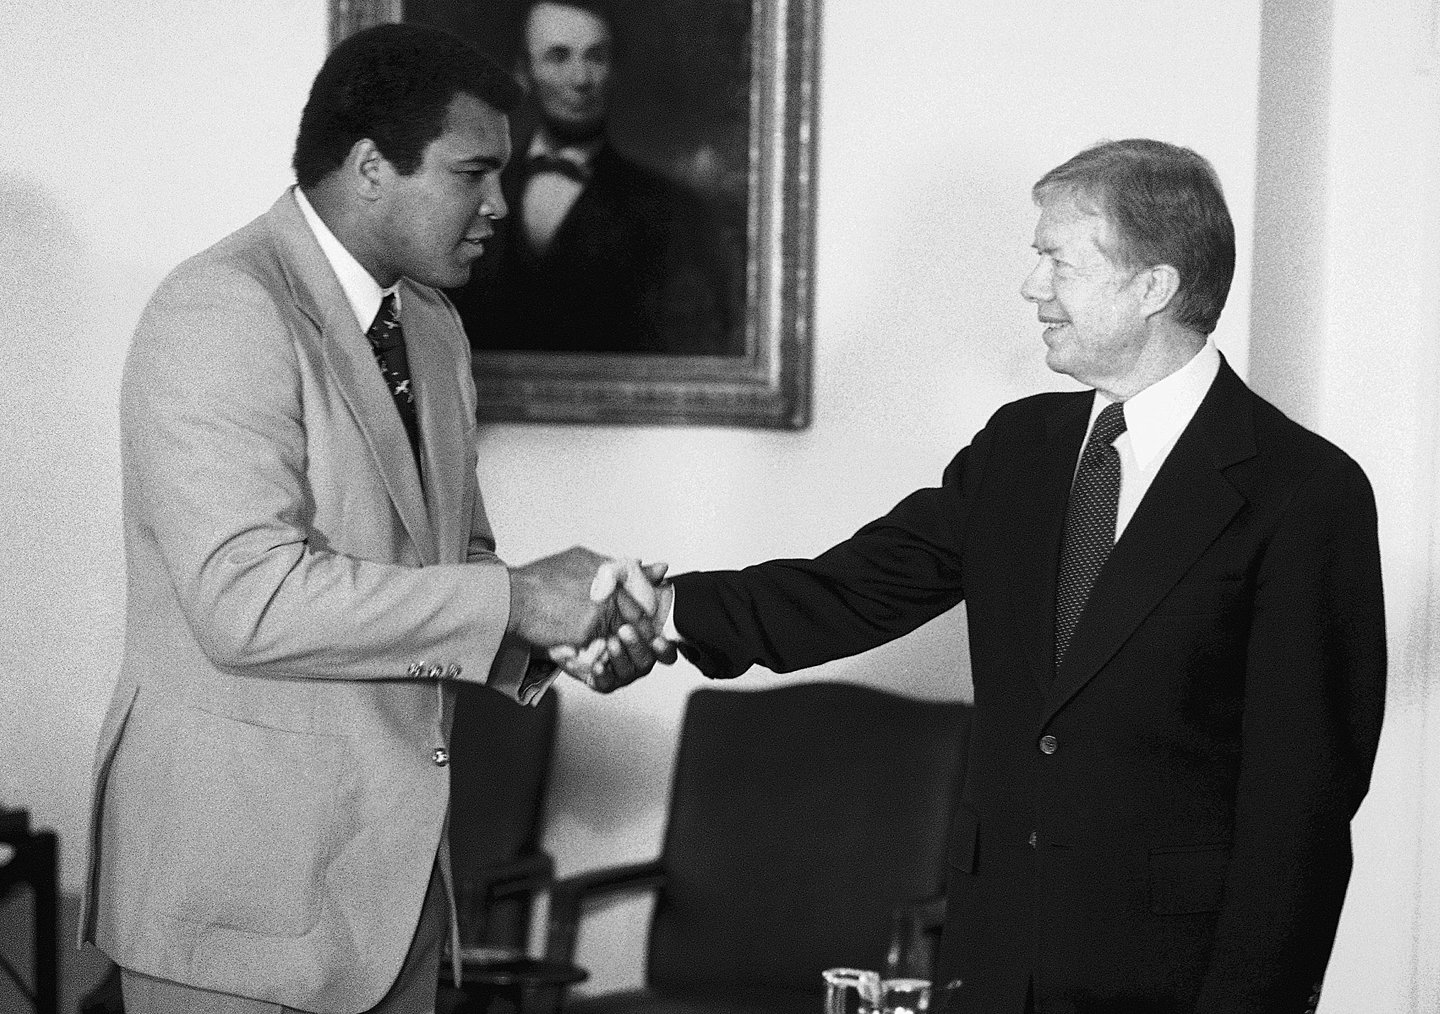 Muhammad Ali shaking hands with President Jimmy Carter at the White House on February 11, 1980. The boxing champ had just returned from a disastrous diplomatic mission in Africa to rally support for Carter's boycott of the Olympics. Within a year, both men would face the end of their respective careers.